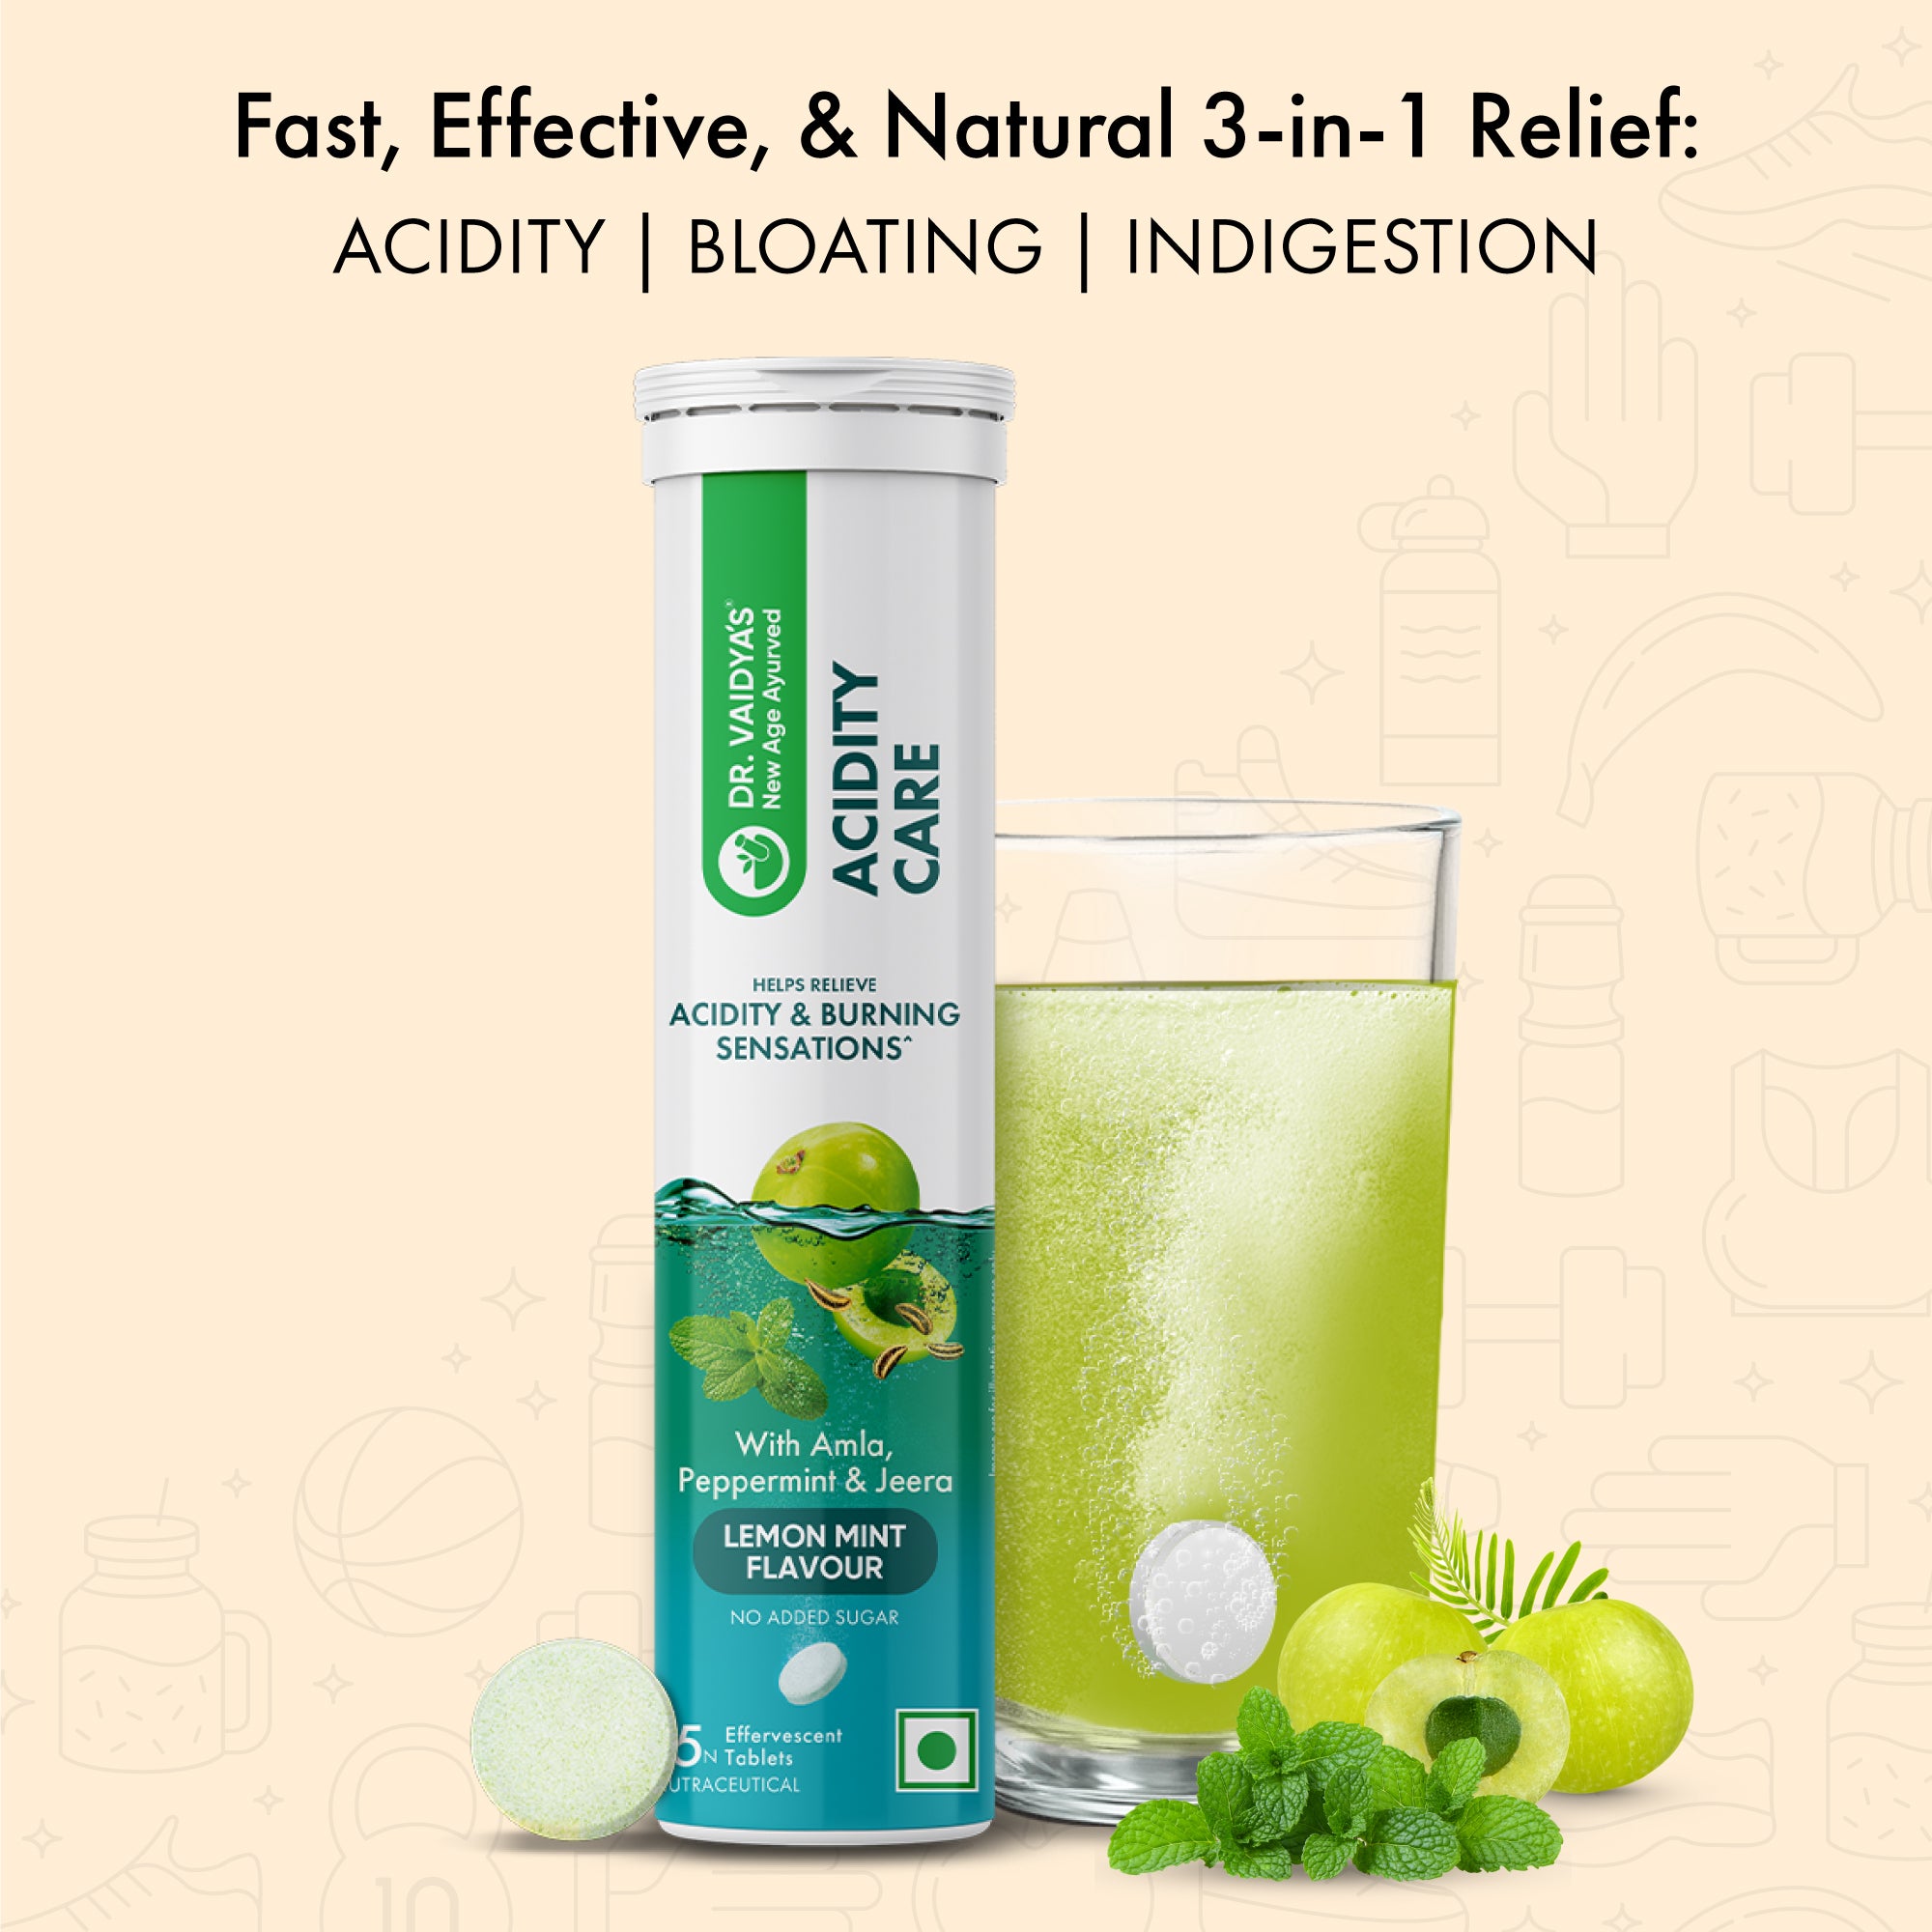 Acidity Care Effervescent Tablets: Fast Relief from Acidity, Bloating, and Upset stomach